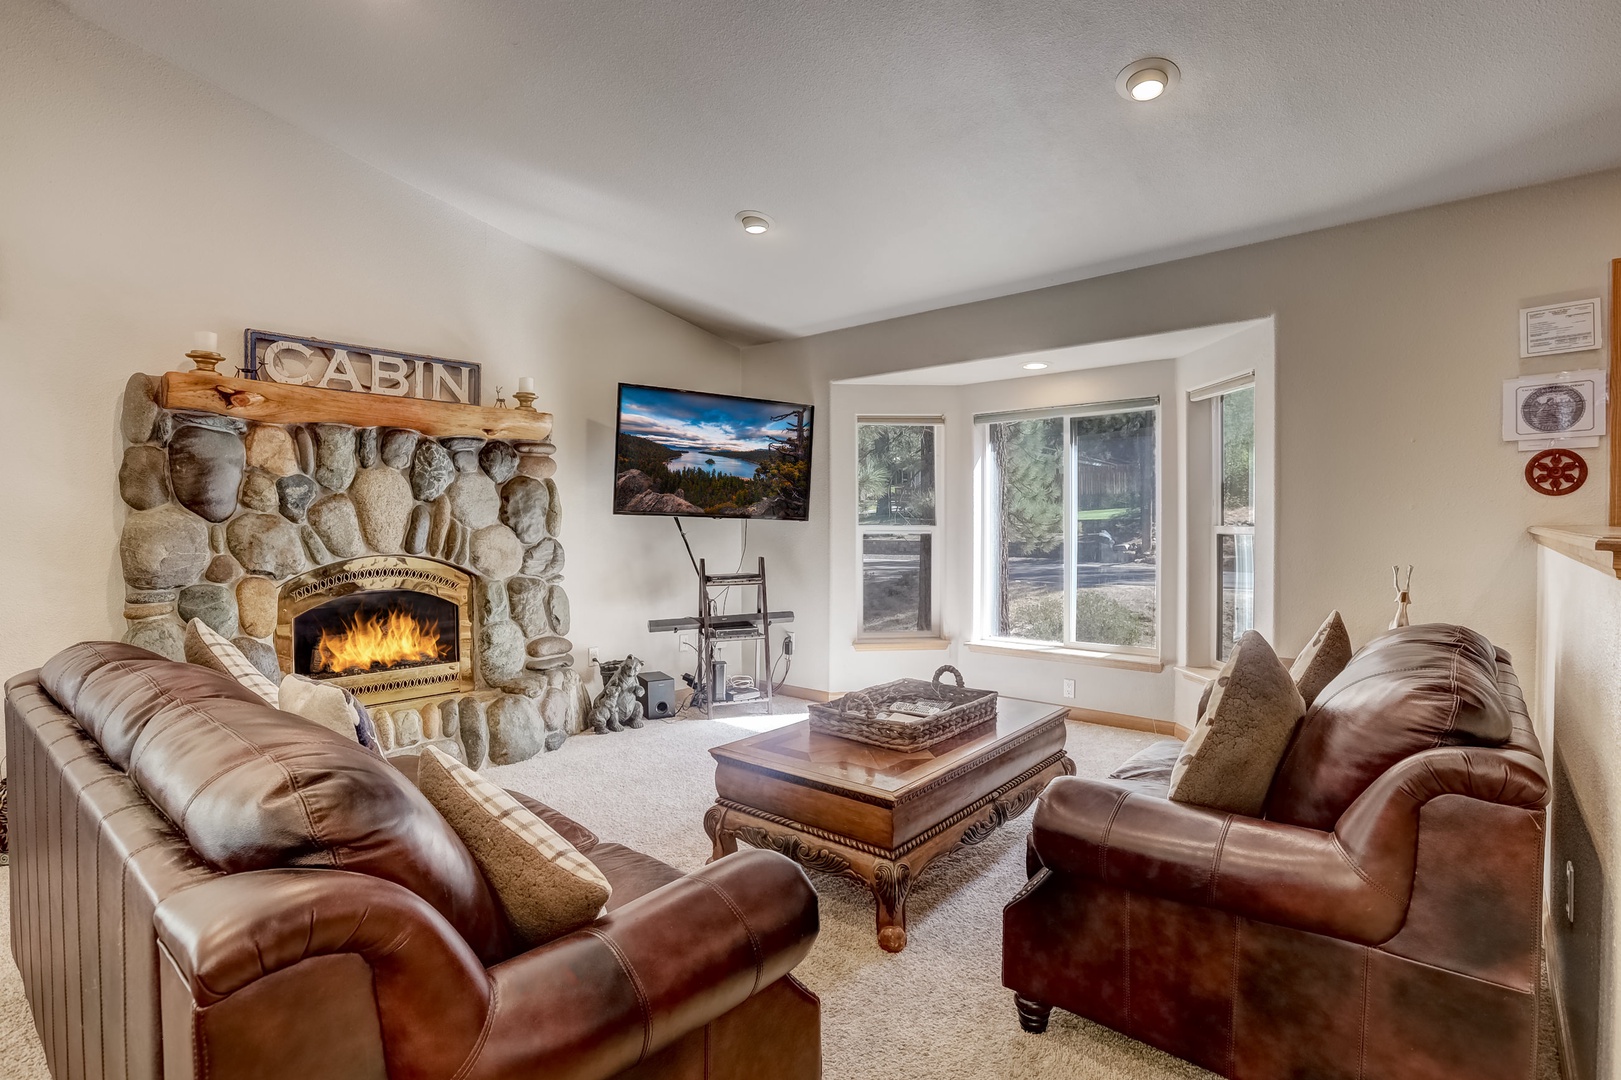 Living room with Smart TV, gas fireplace, and comfortable seating